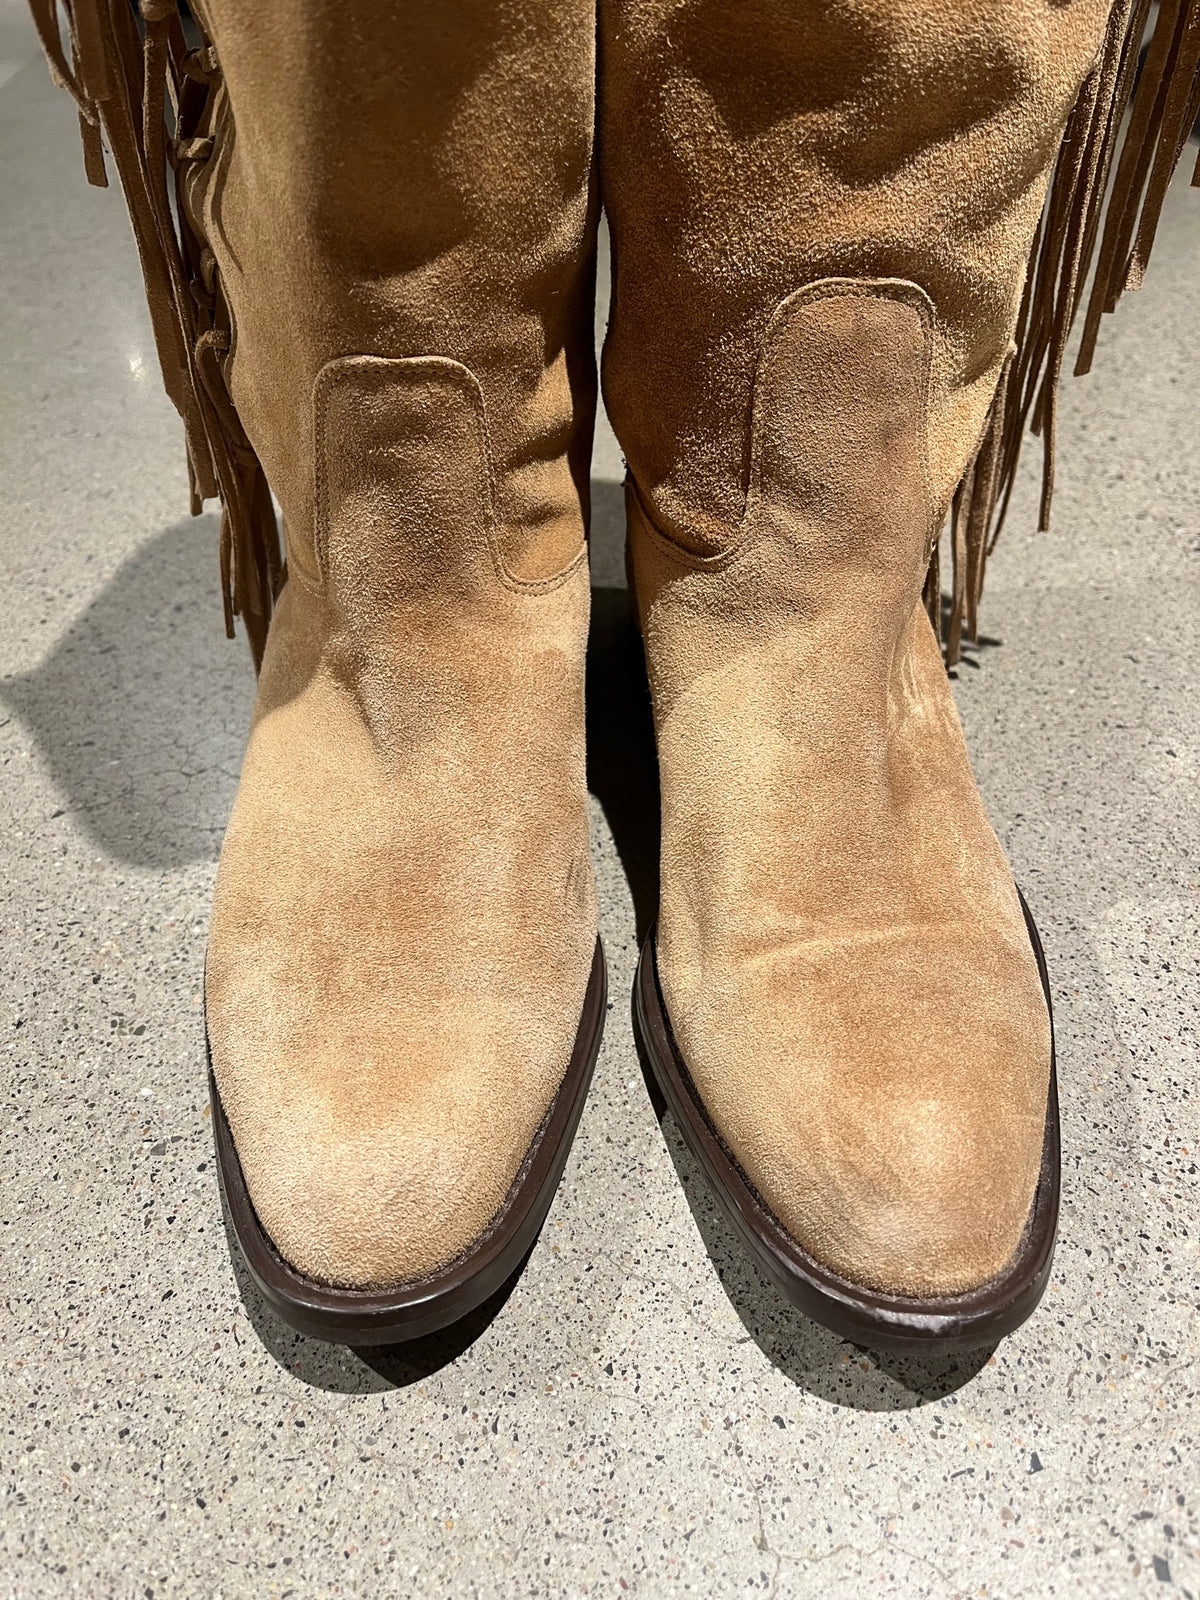 Vintage Coach Tall Fringe Boots